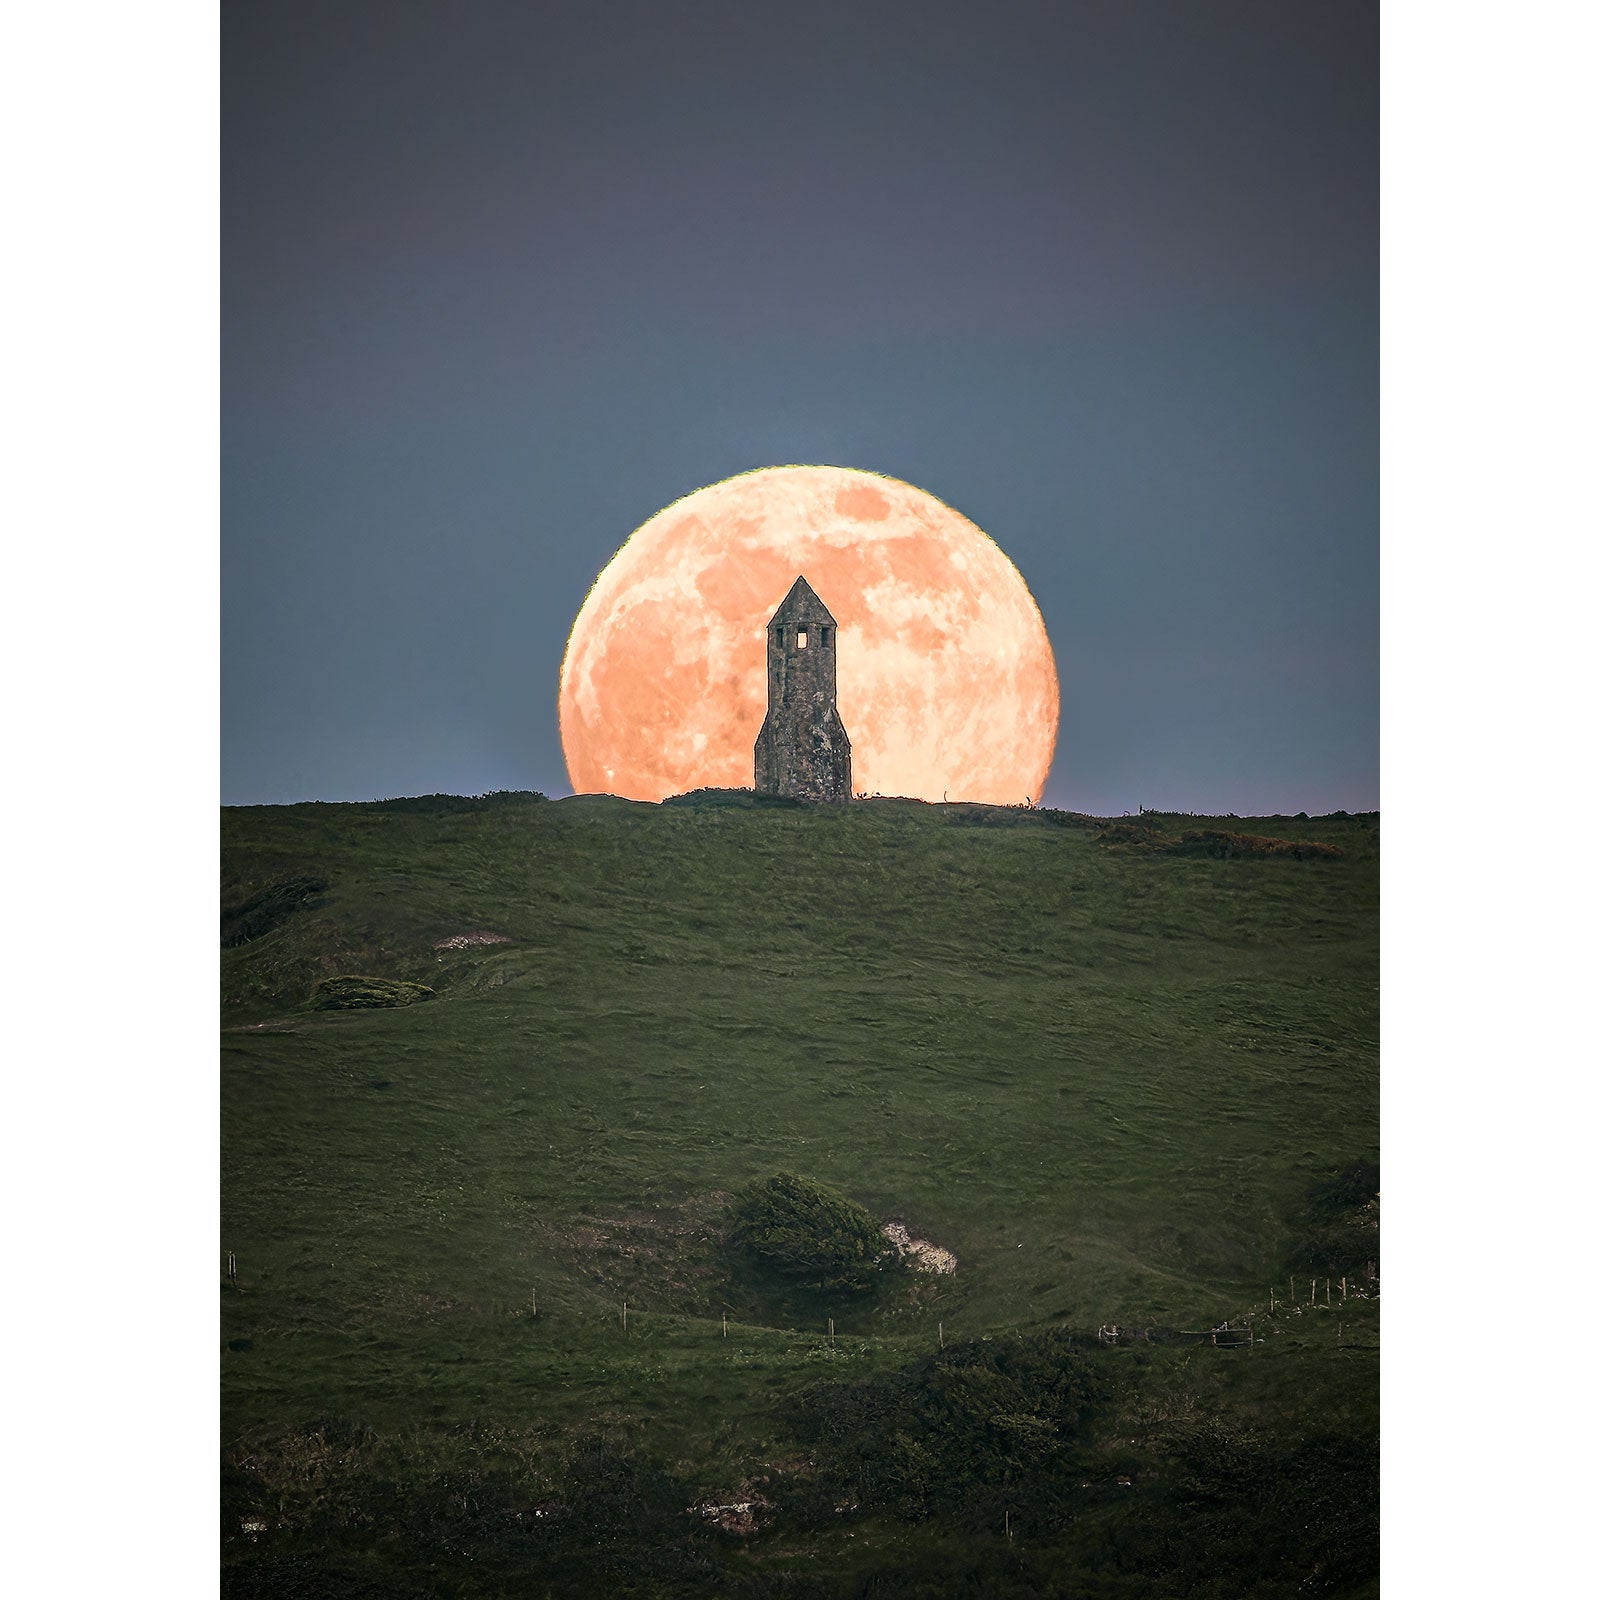 A Moonrise at St. Catherine's Oratory rises directly behind a lone tower atop a grassy hill on the Isle of Wight by Available Light Photography.